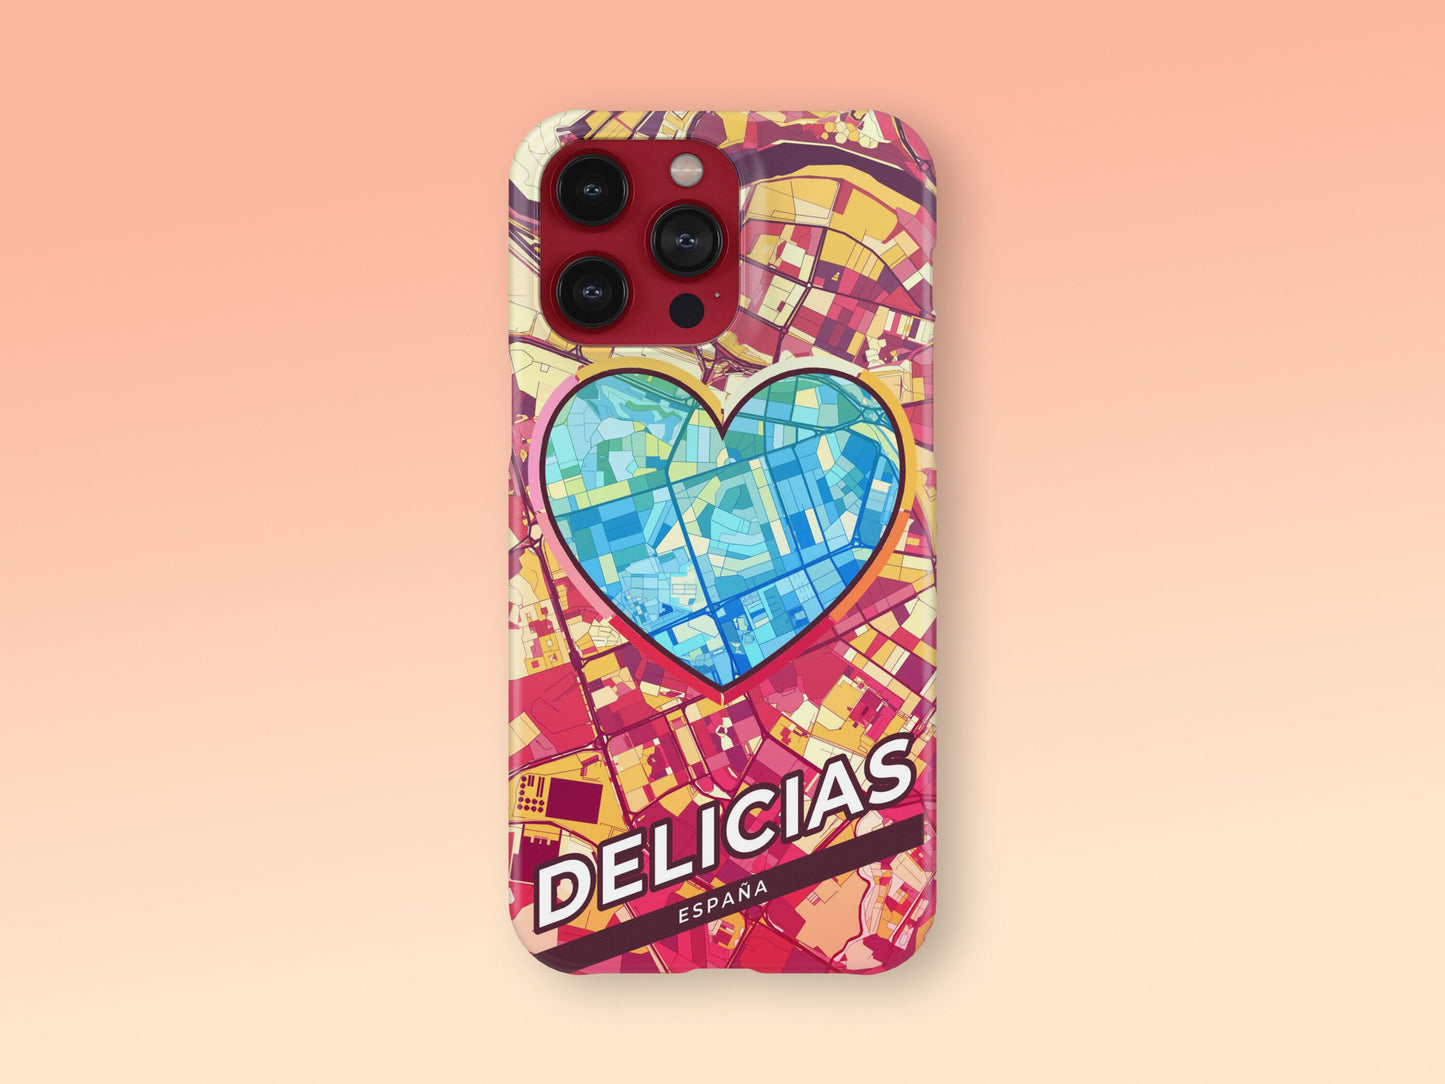 Delicias Spain slim phone case with colorful icon. Birthday, wedding or housewarming gift. Couple match cases. 2